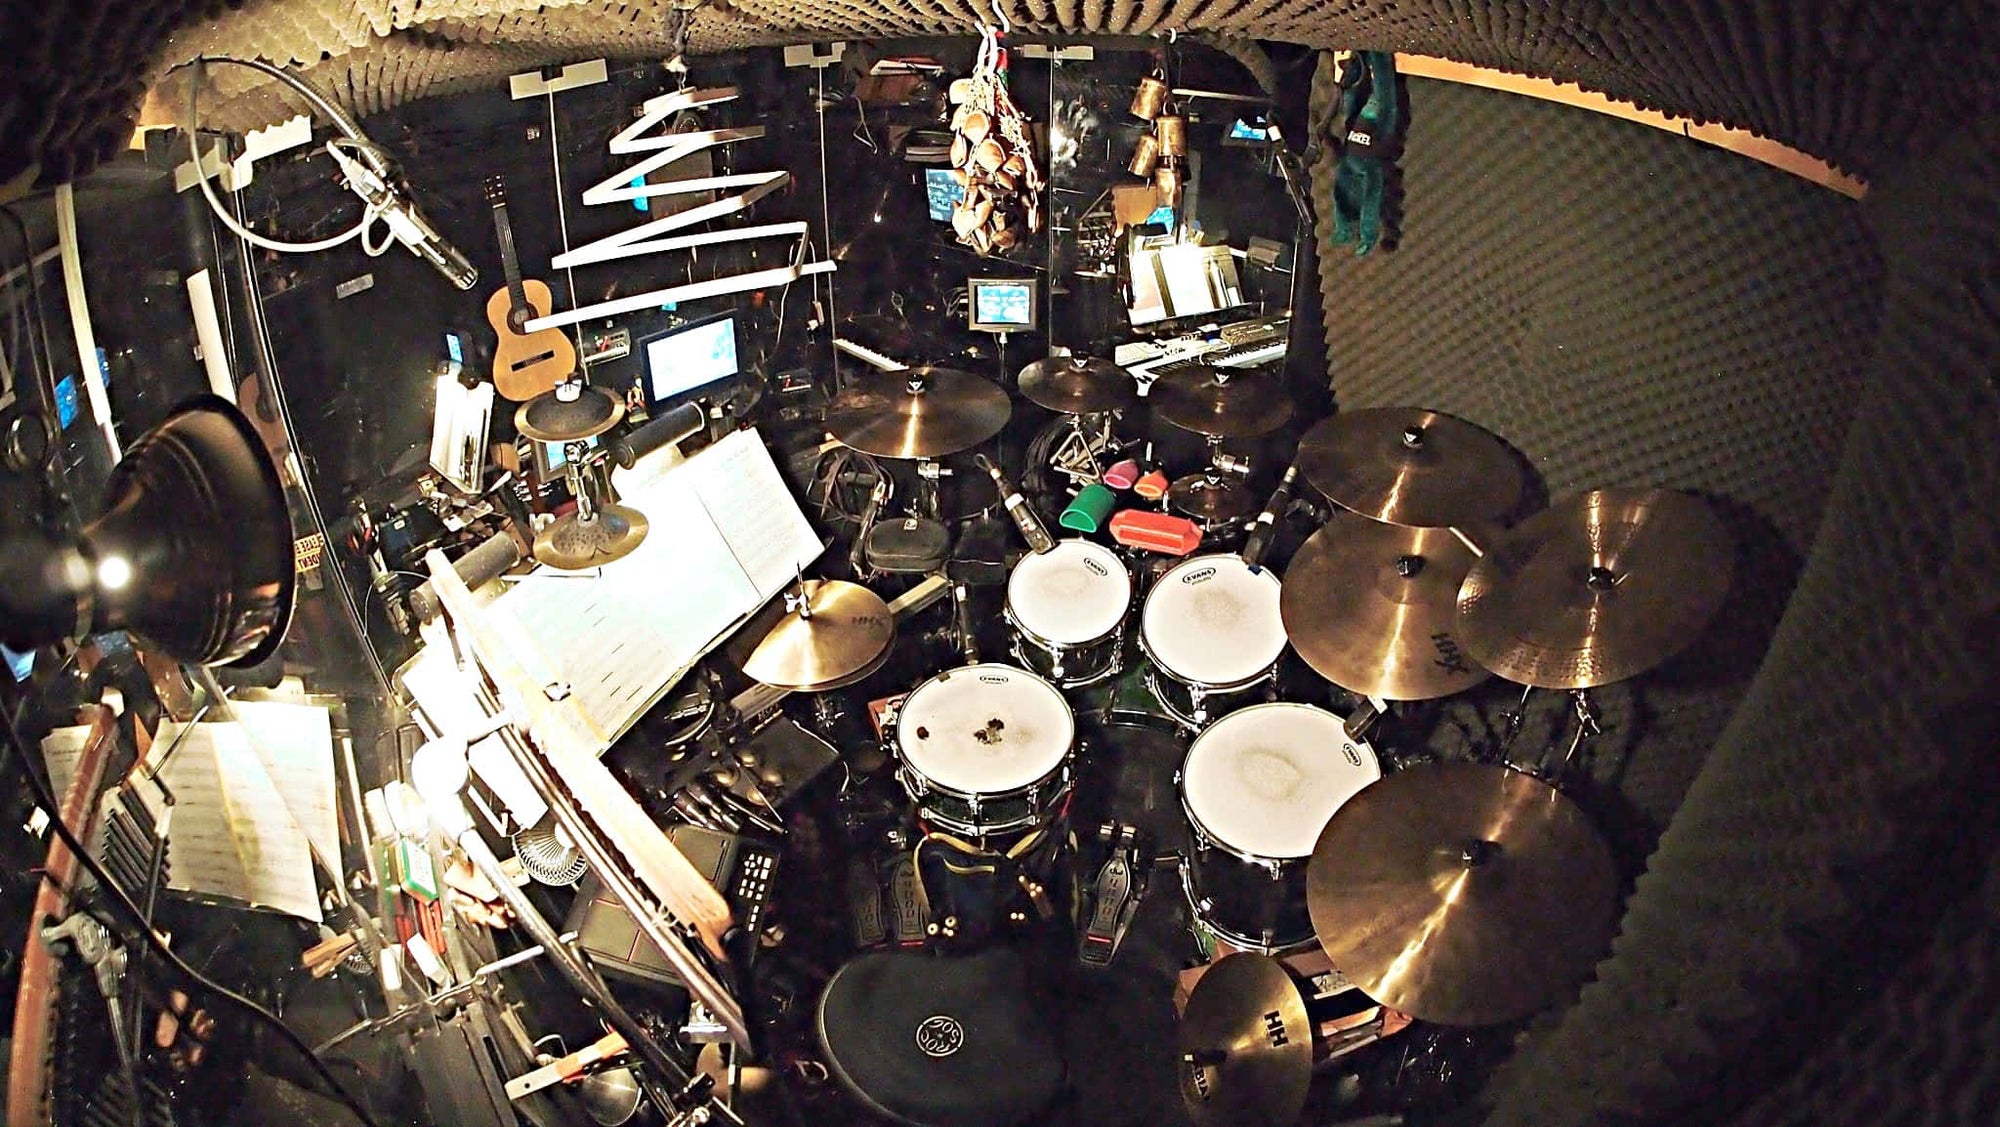 Matt Vander Ende's drum set setup for the currently running Broadway production of Wicked at the Gershwin Theatre.